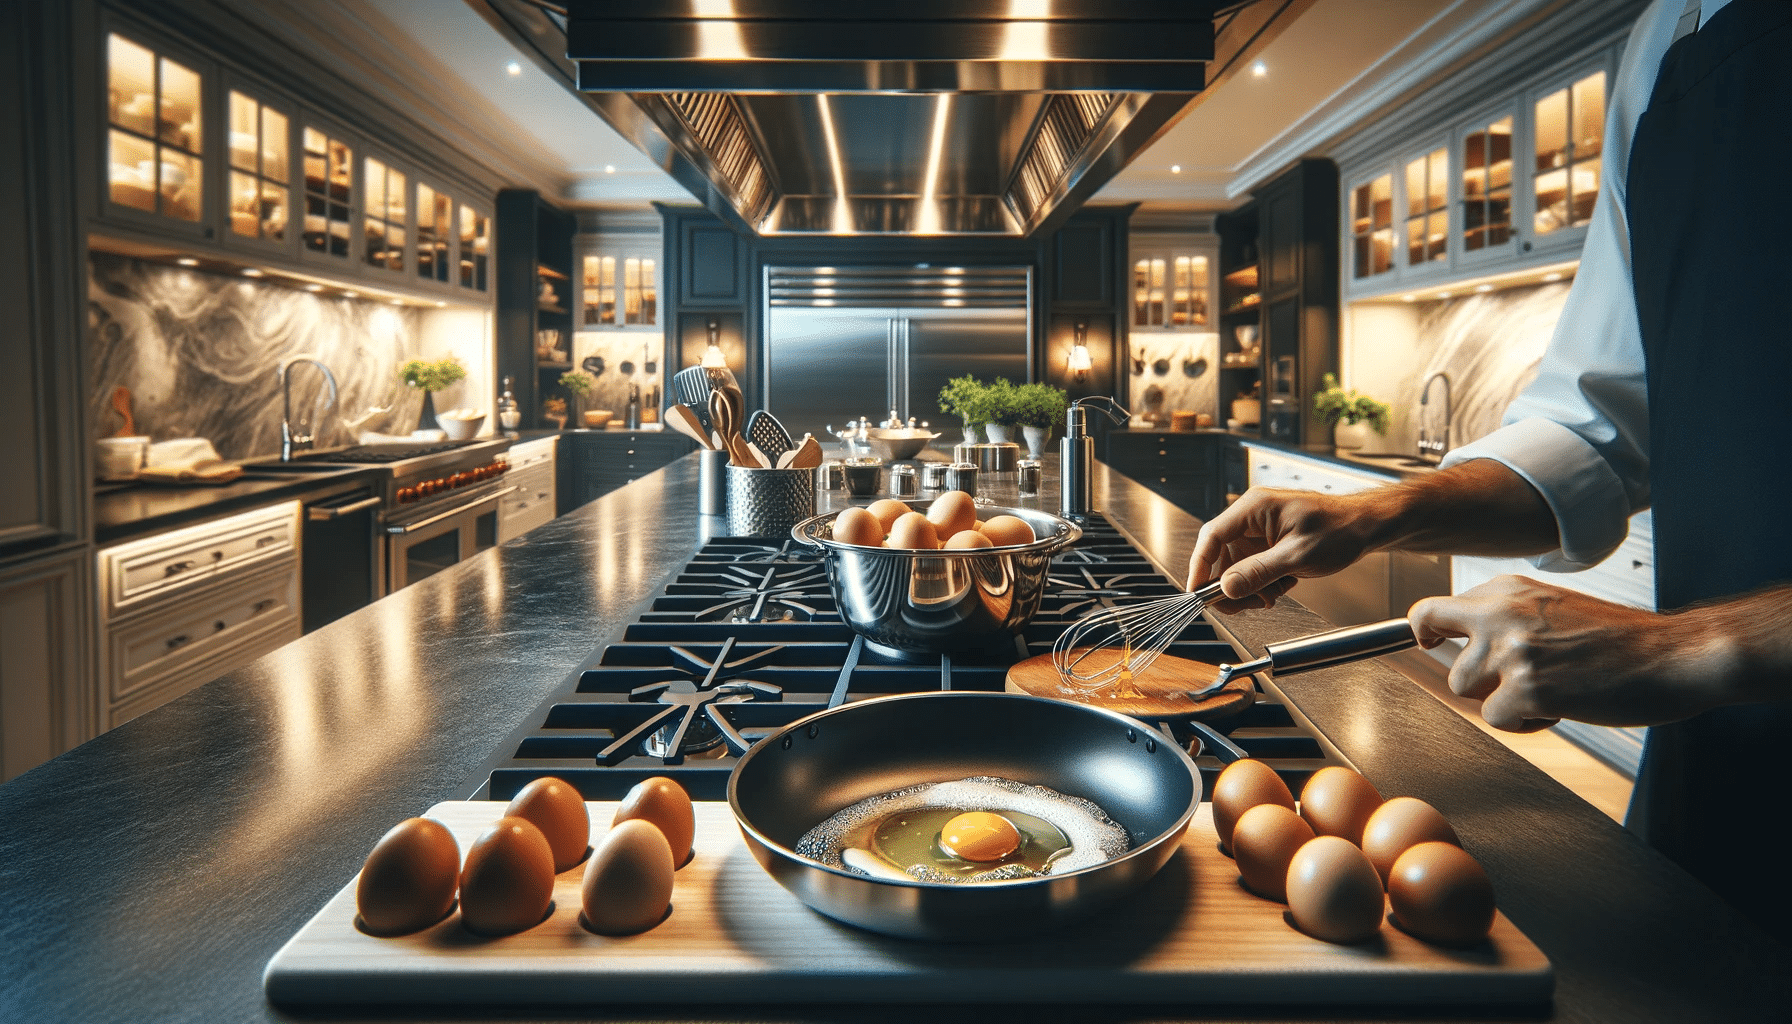 A close up horizontal view focusing on a kitchen island in a modern gourmet kitchen. The perspective is from the kitchen island looking out towards t